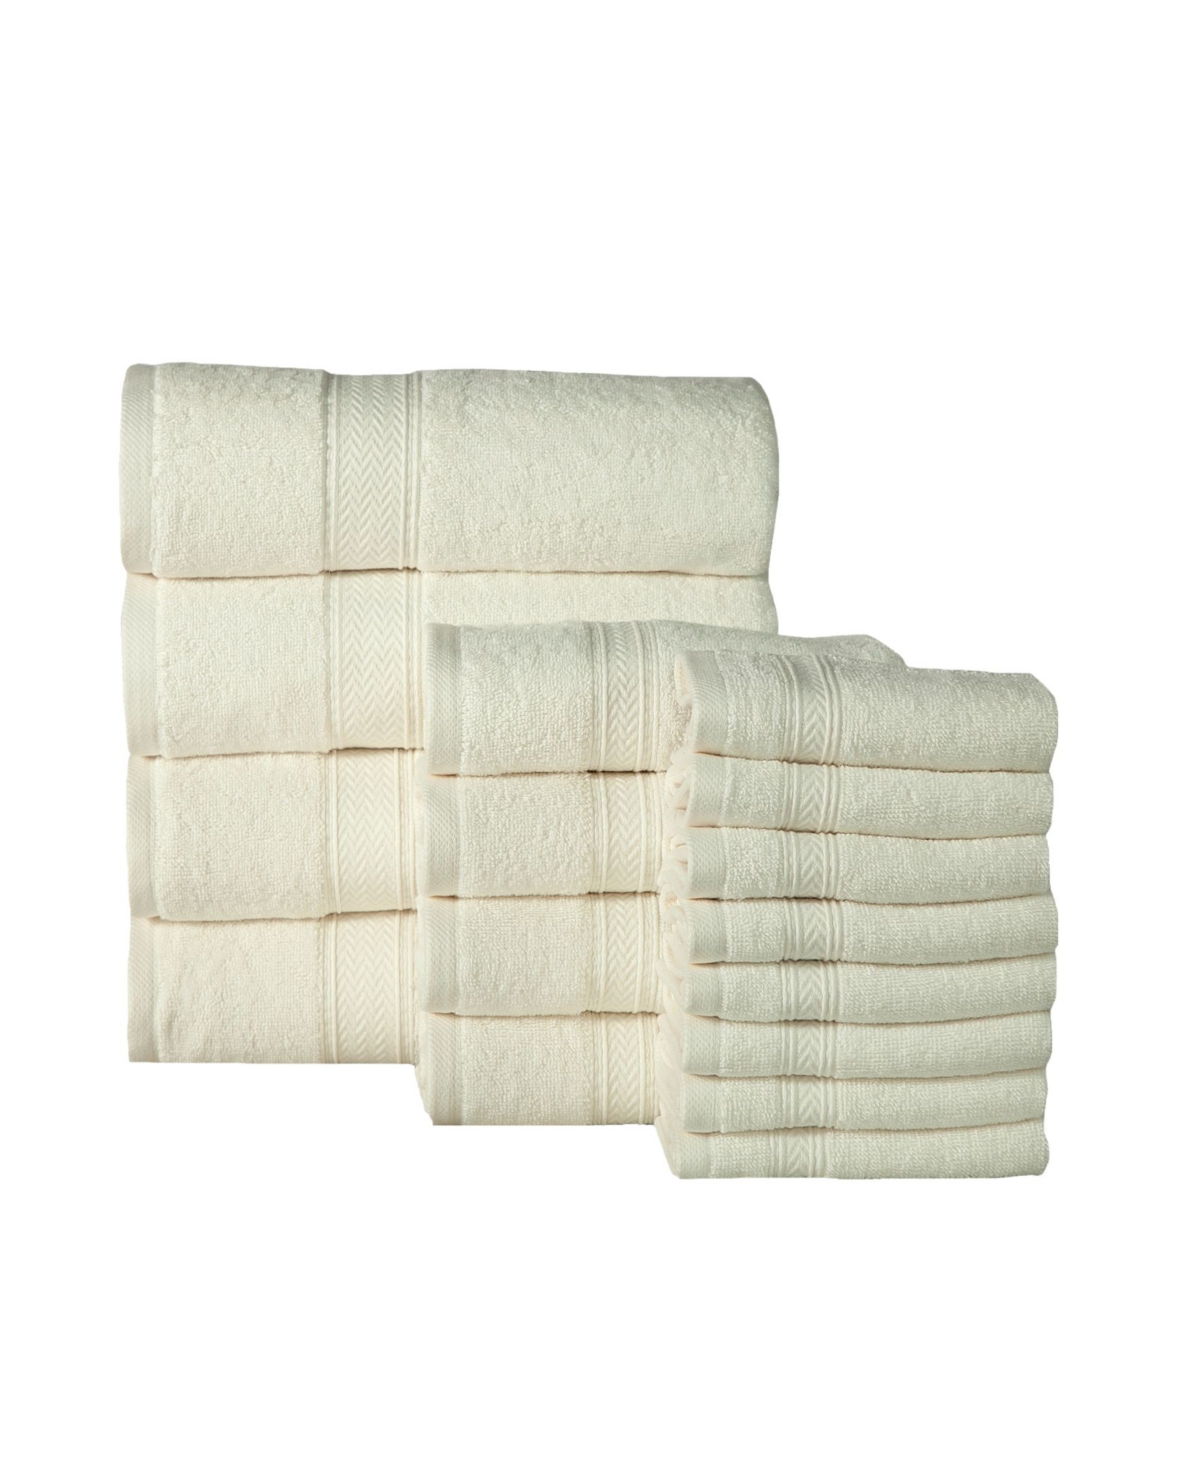 Addy Home Fashions Soft And Absorbent Spa Quality Towel Set - 16 Piece Bedding In Ivory